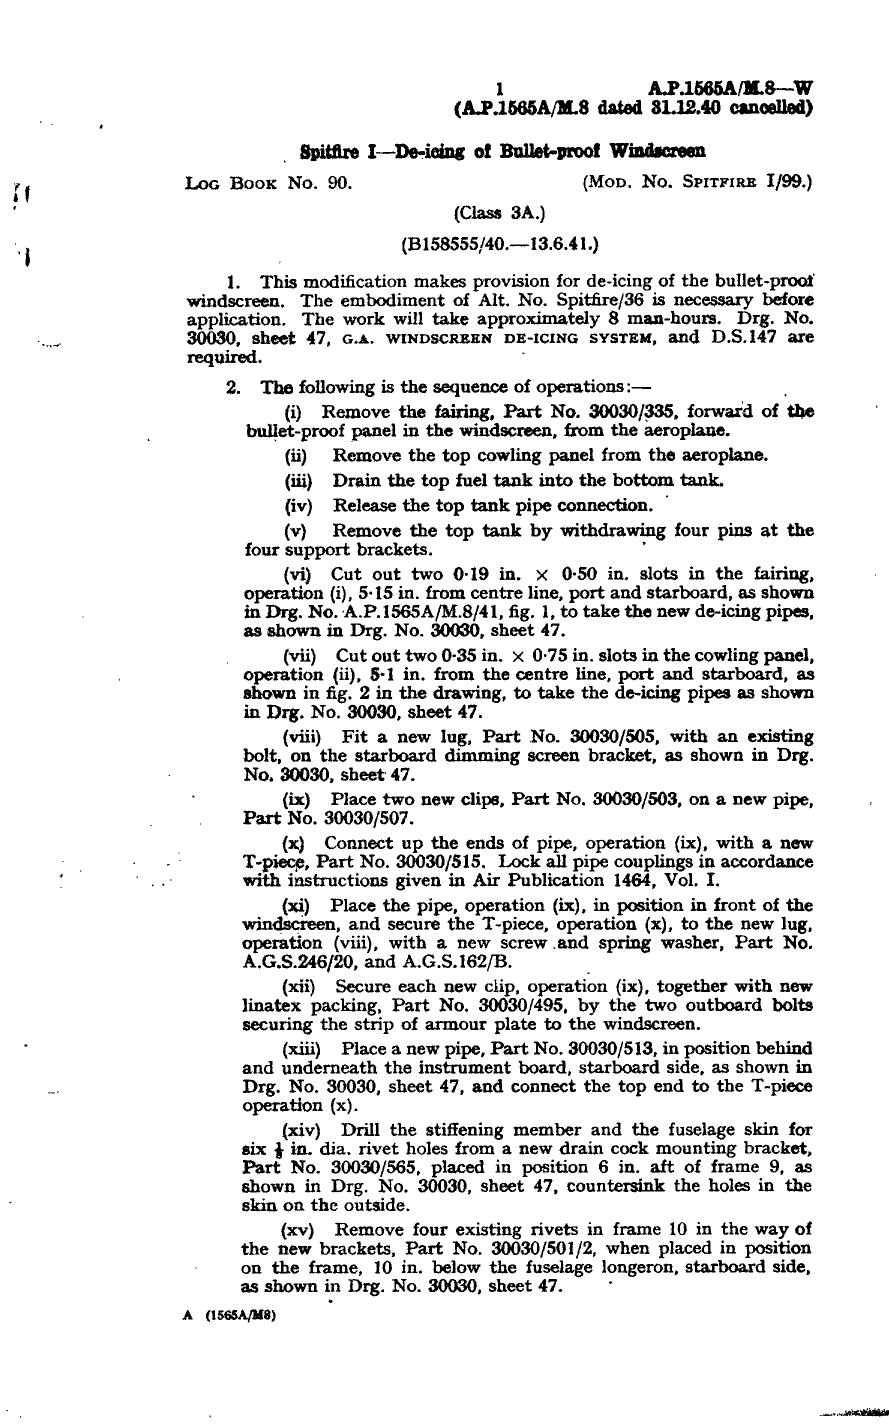 Sample page 1 from AirCorps Library document: Spitfire I De-Icing of Bullet-Proof Windscreen